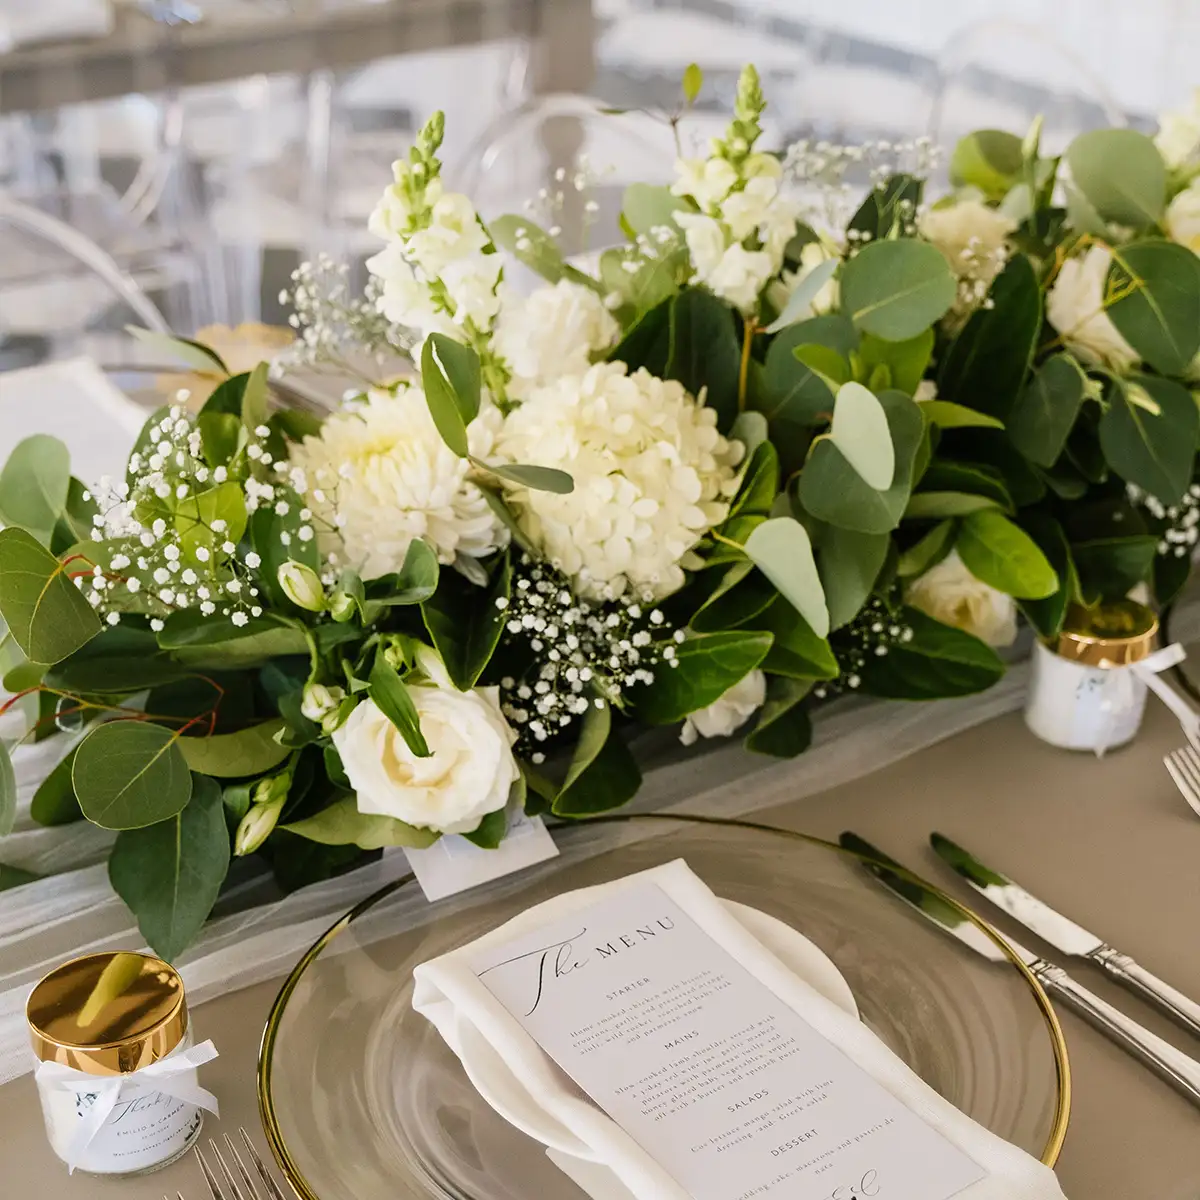 Elegant event table setting featuring a lush green and white floral centrepiece, clear glass plates with gold accents, and a beautifully printed menu. Perfect for sophisticated events. Fabulous Flowers and Gifts.